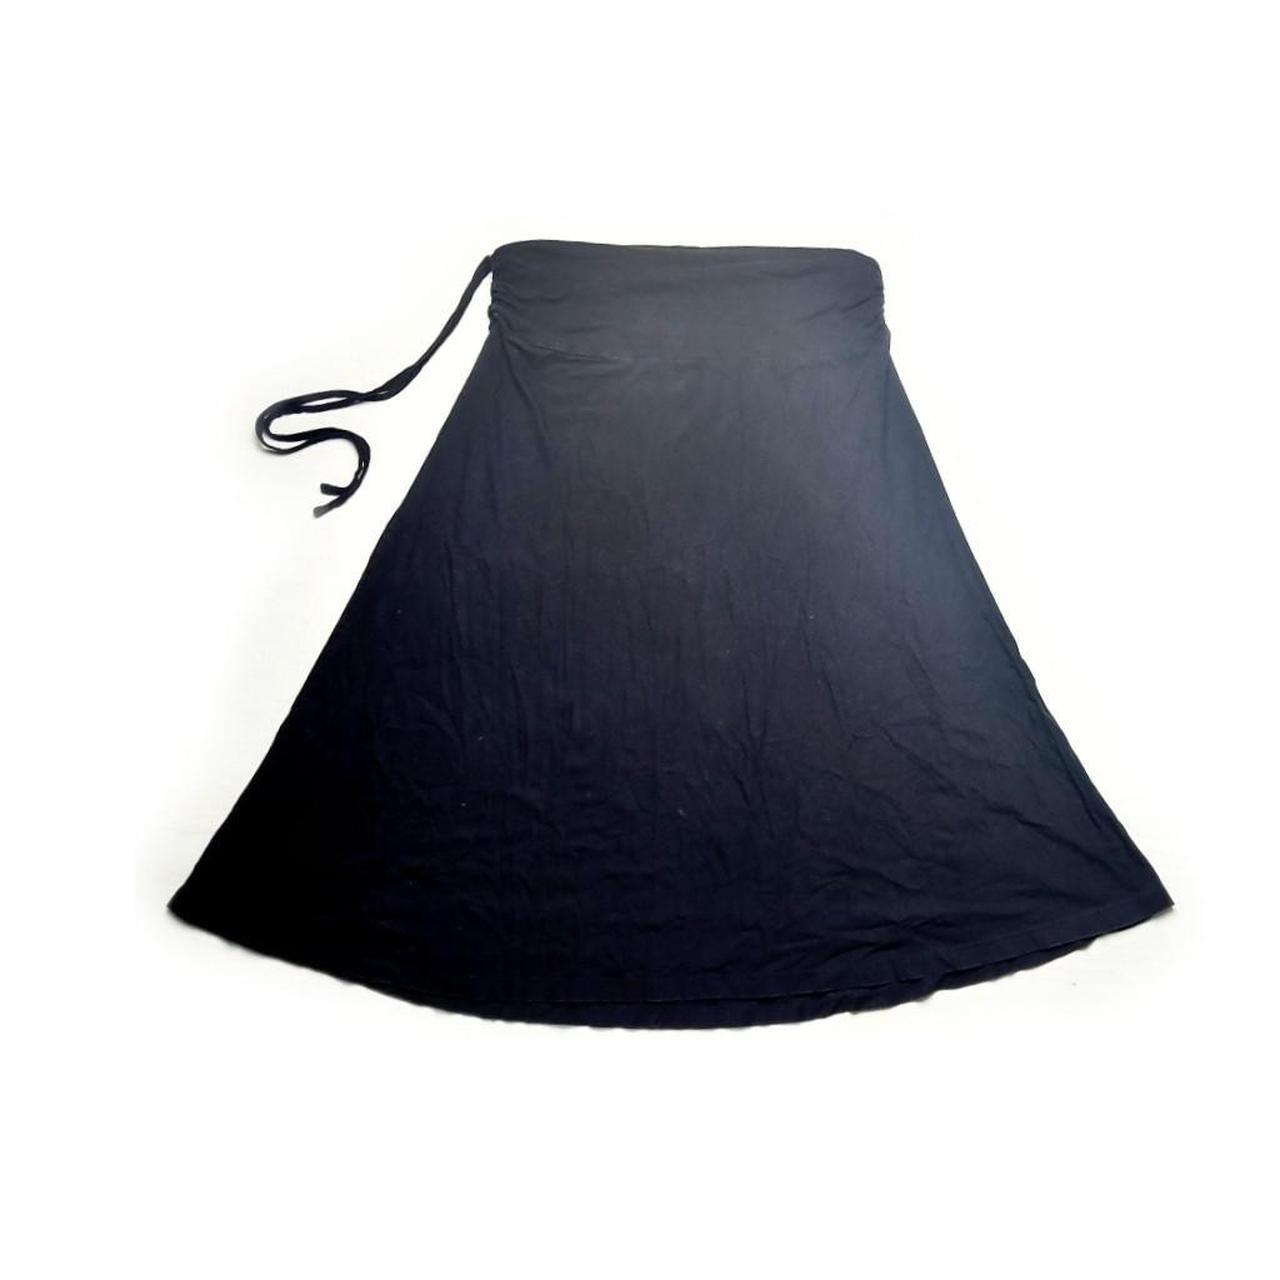 Product Image 1 - Black Skirt

Comfortable and stretchy, the